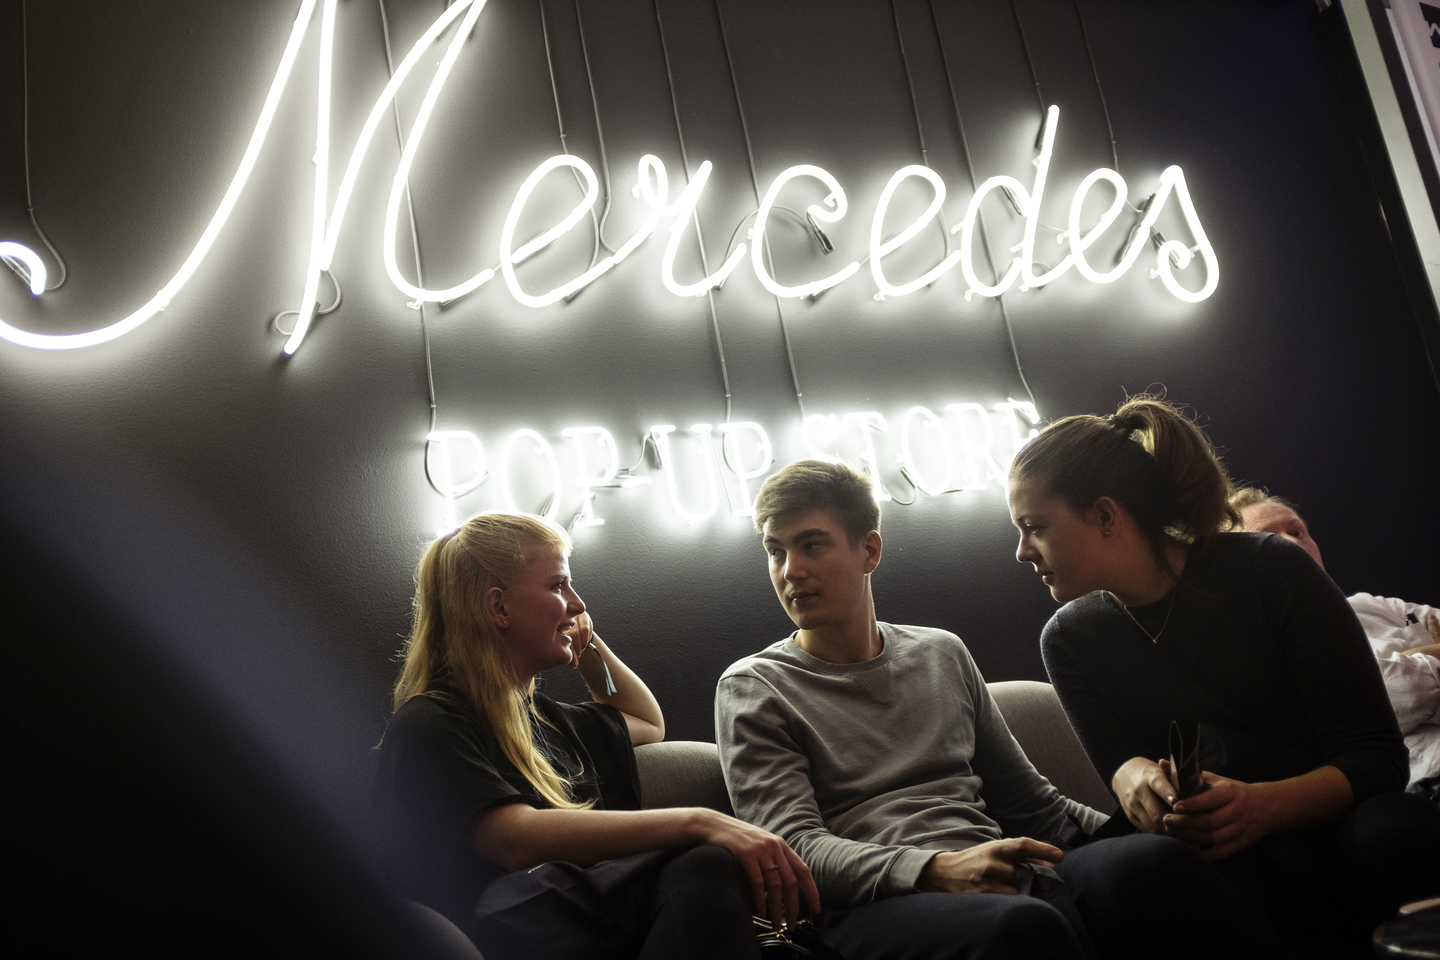 Visitors enjoyed the Mercedes-Benz pop-up store. Photo by Teymur Madjderey/Daimler AG